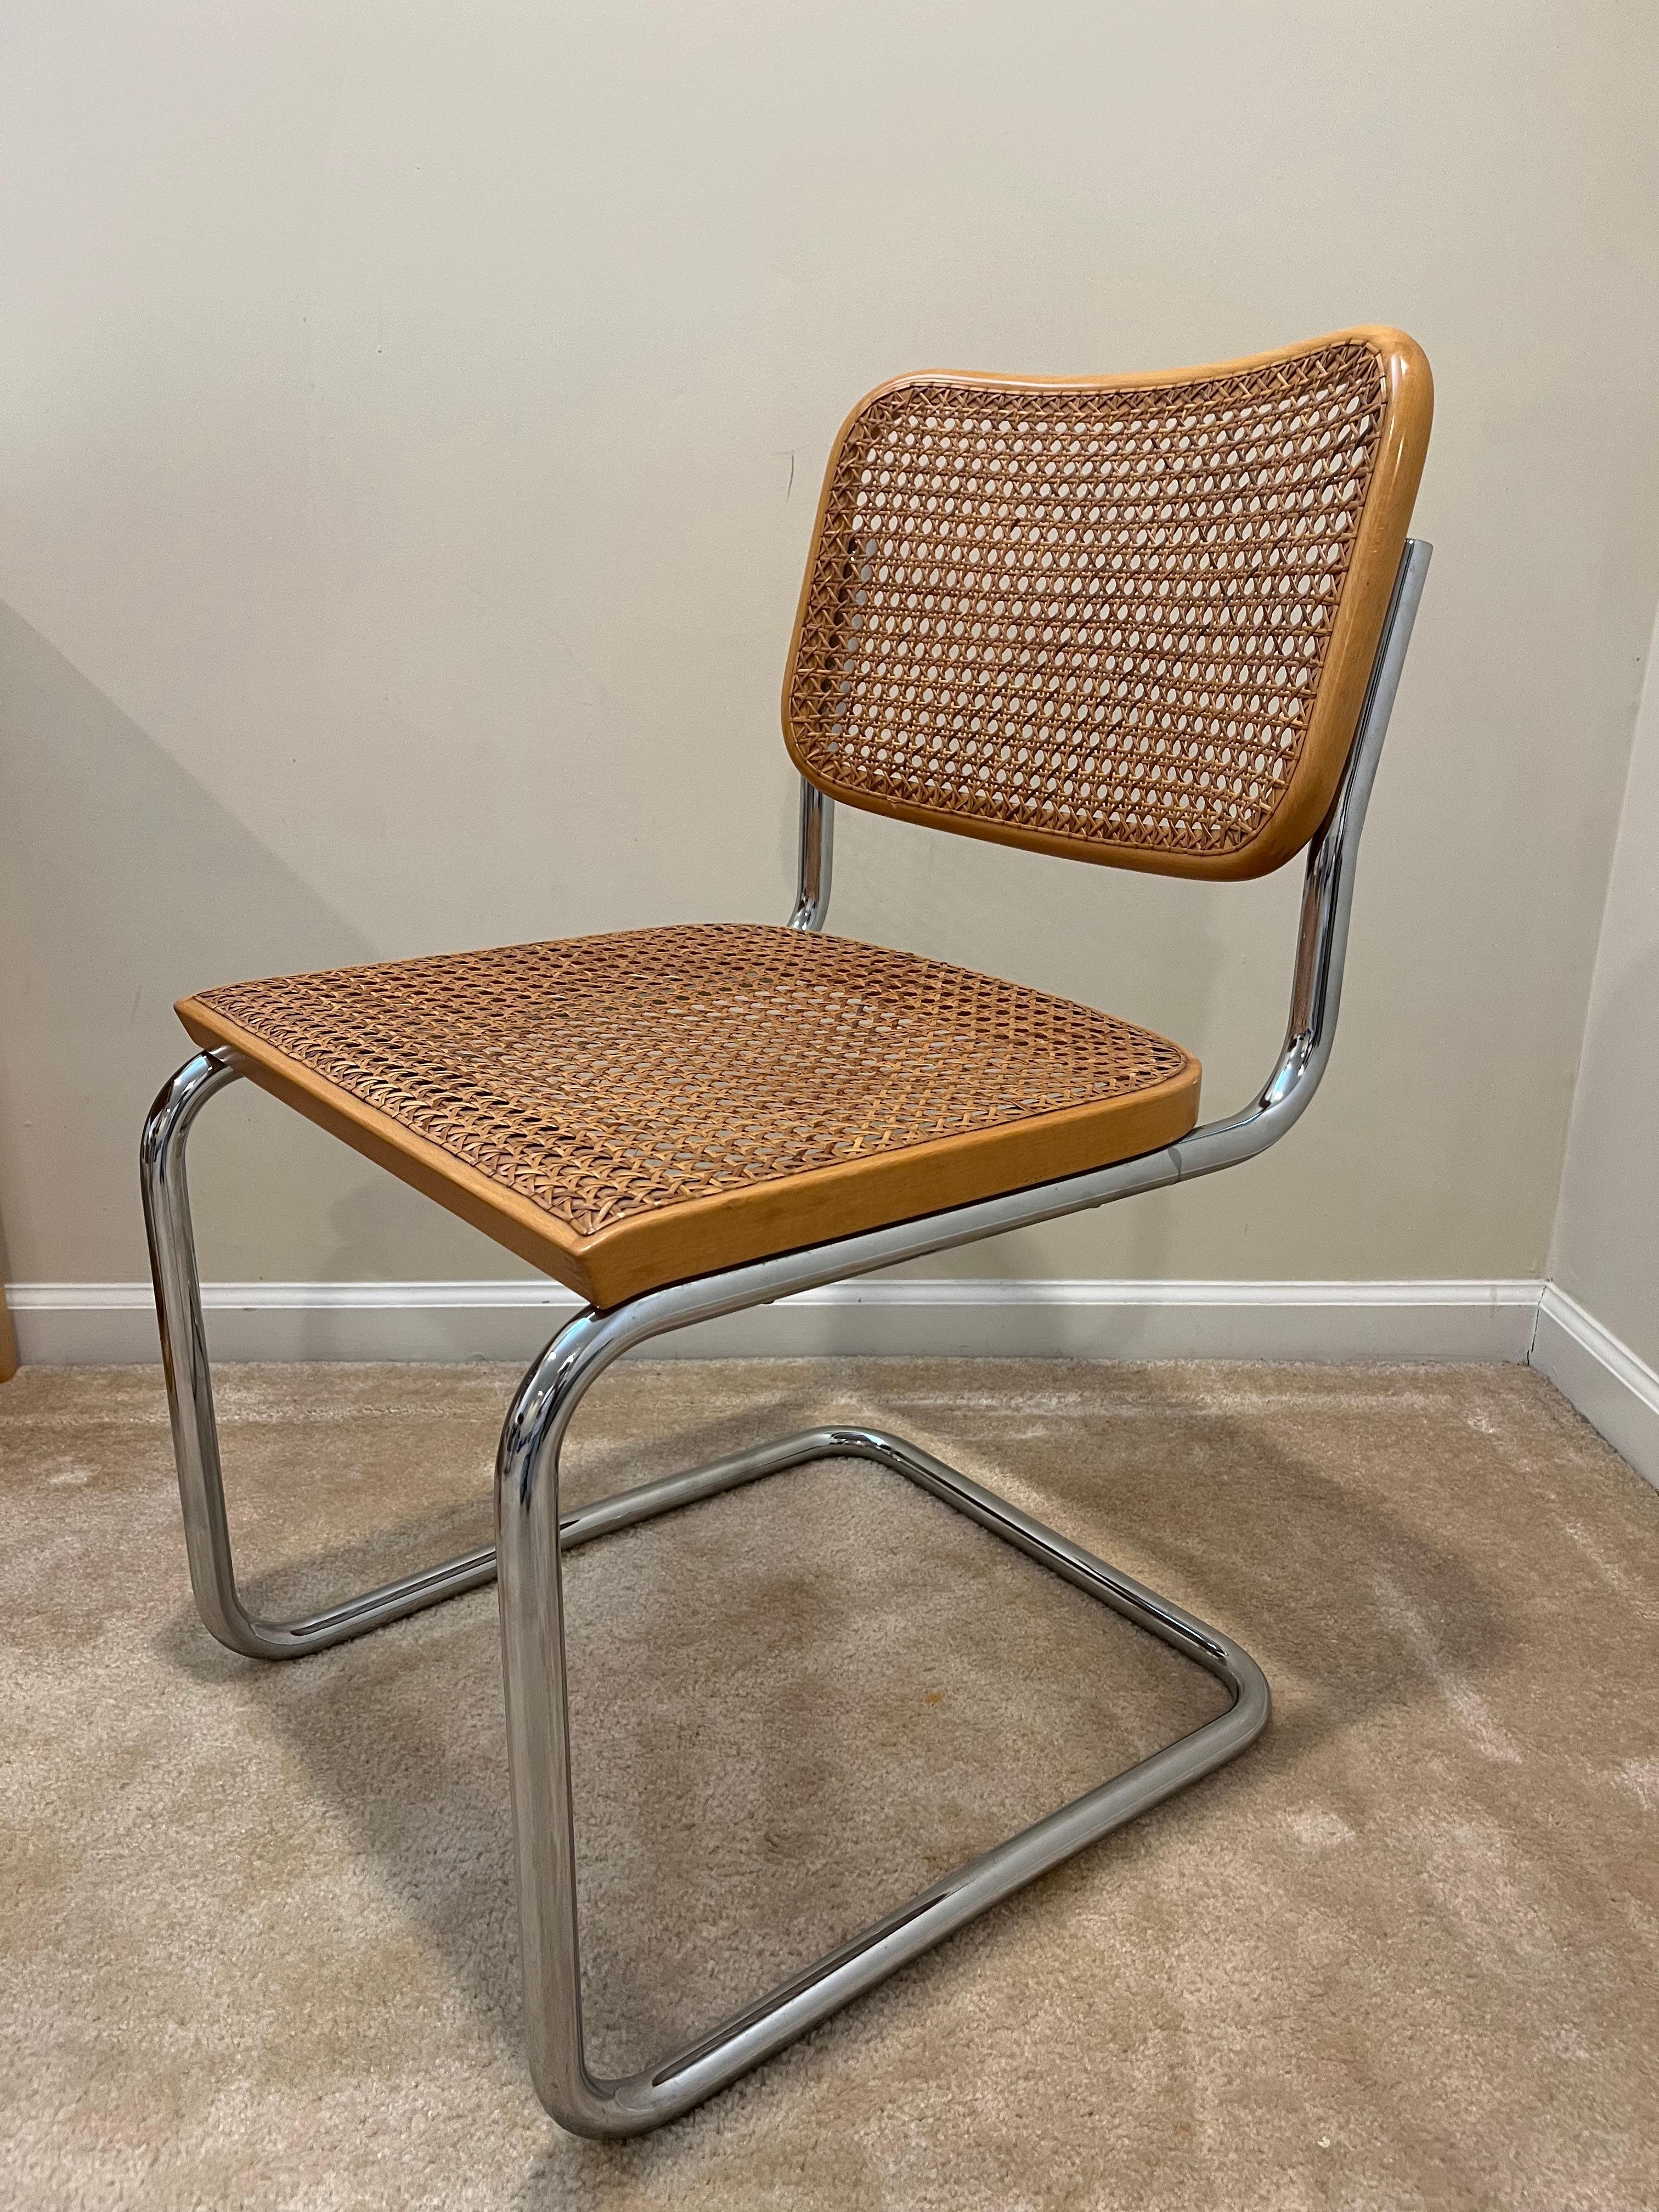 Authentic Cesca chair designed by Marcel Breuer for Knoll (Manufactured by GAVINA, 1973)

Vintage hand caned version (You can see the hand caning evidence on the underside of the seat)
Manufactured on January 23, 1973

It has 